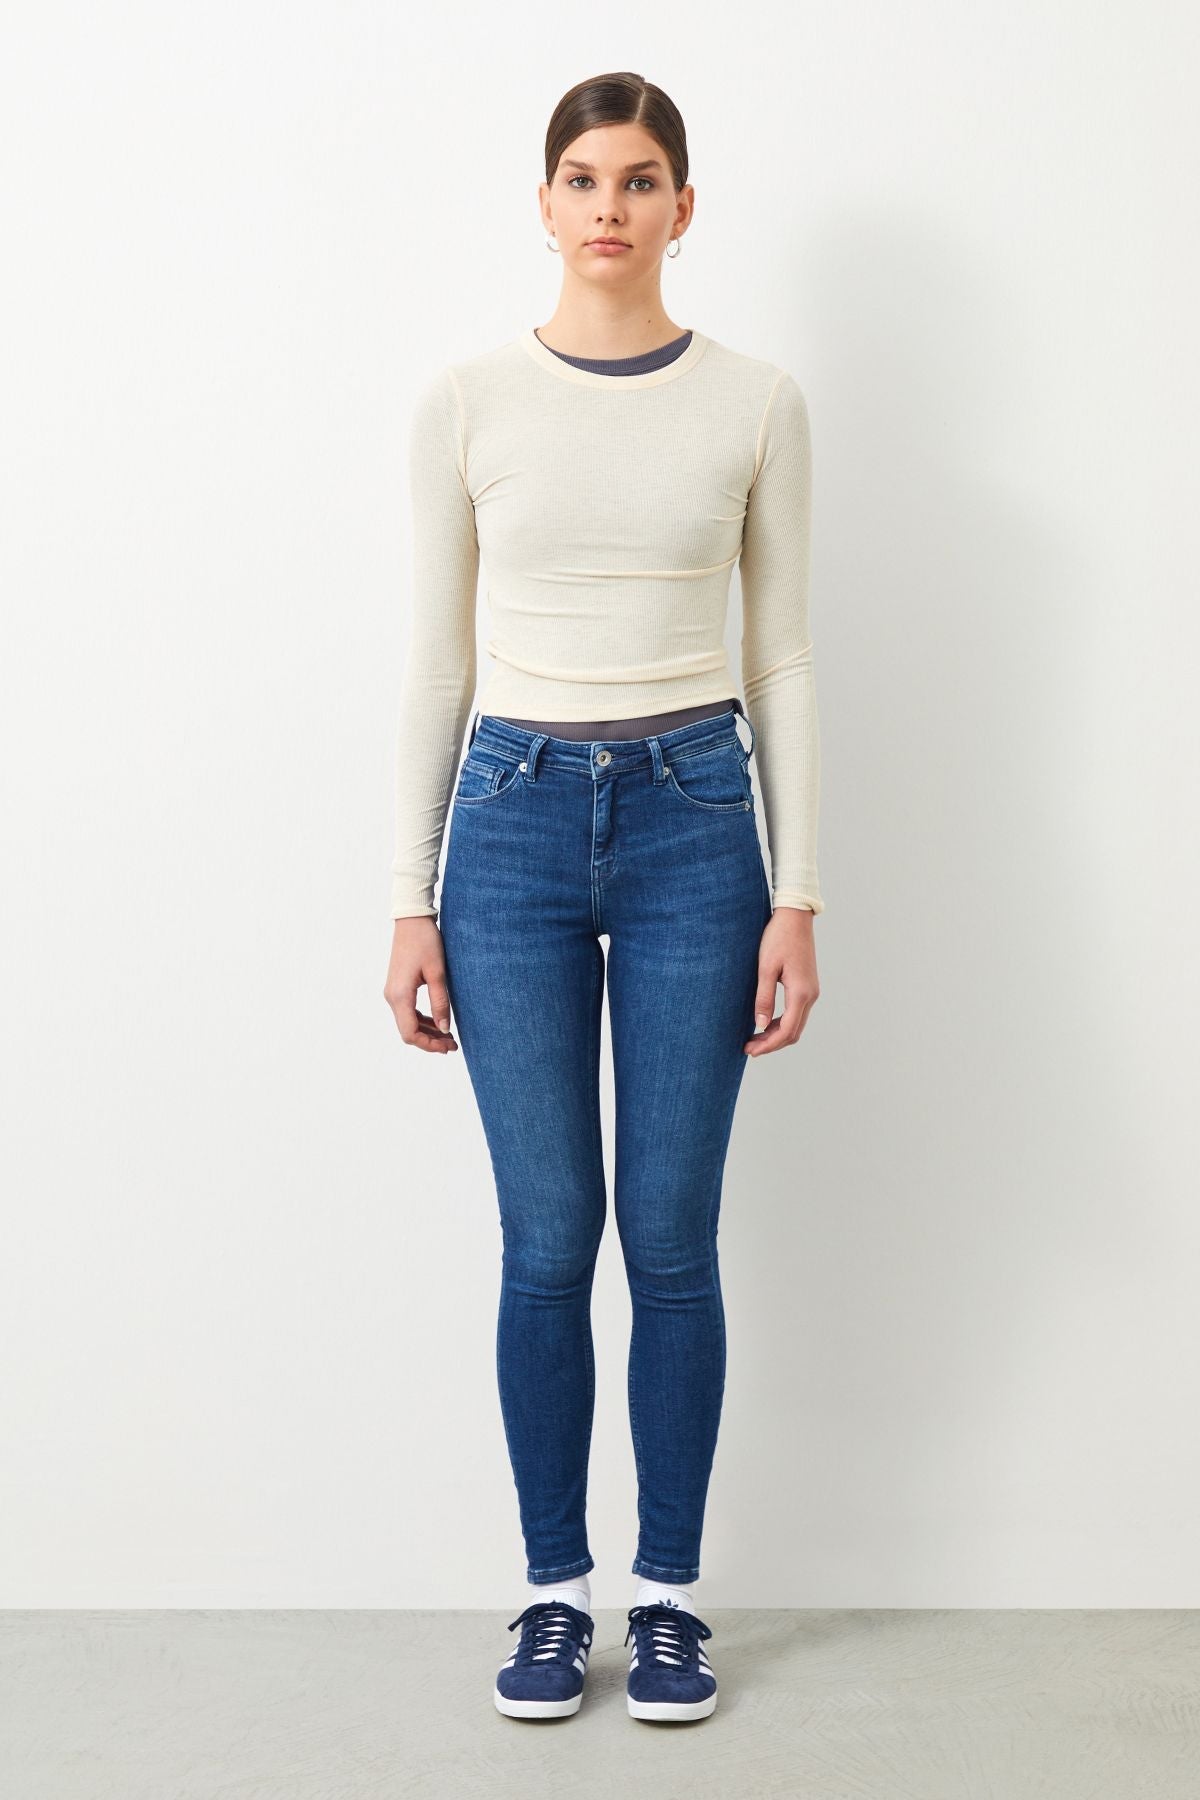 Model wearing Sira Skinny Fit Dark Blue Women's Jeans with a tight white top, highlighting the perfect fit.